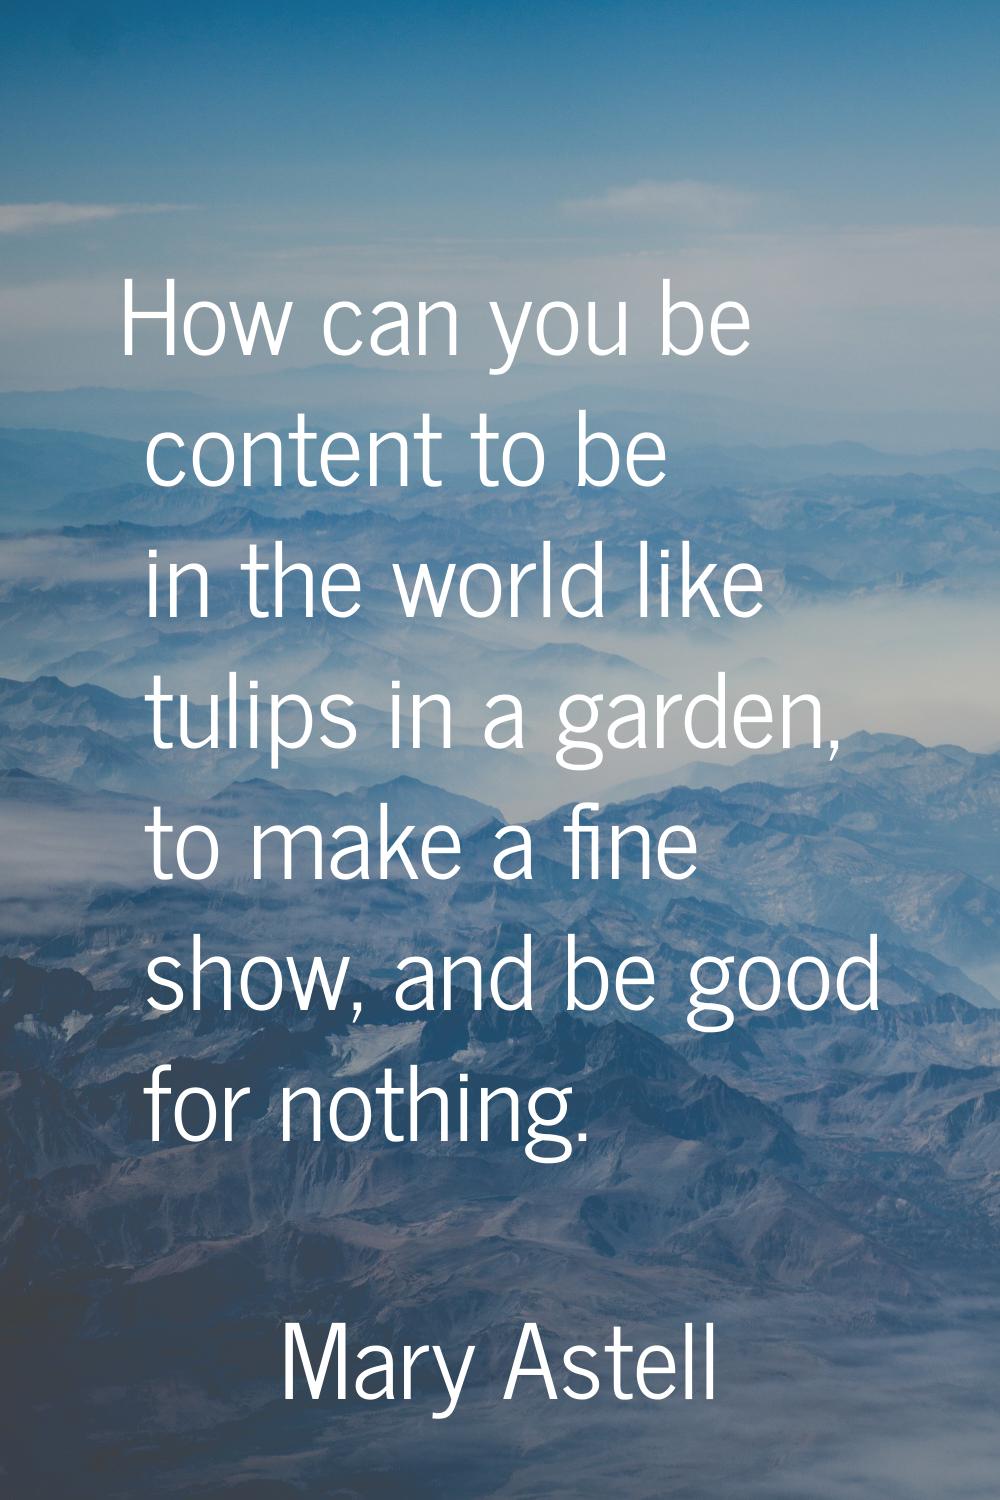 How can you be content to be in the world like tulips in a garden, to make a fine show, and be good